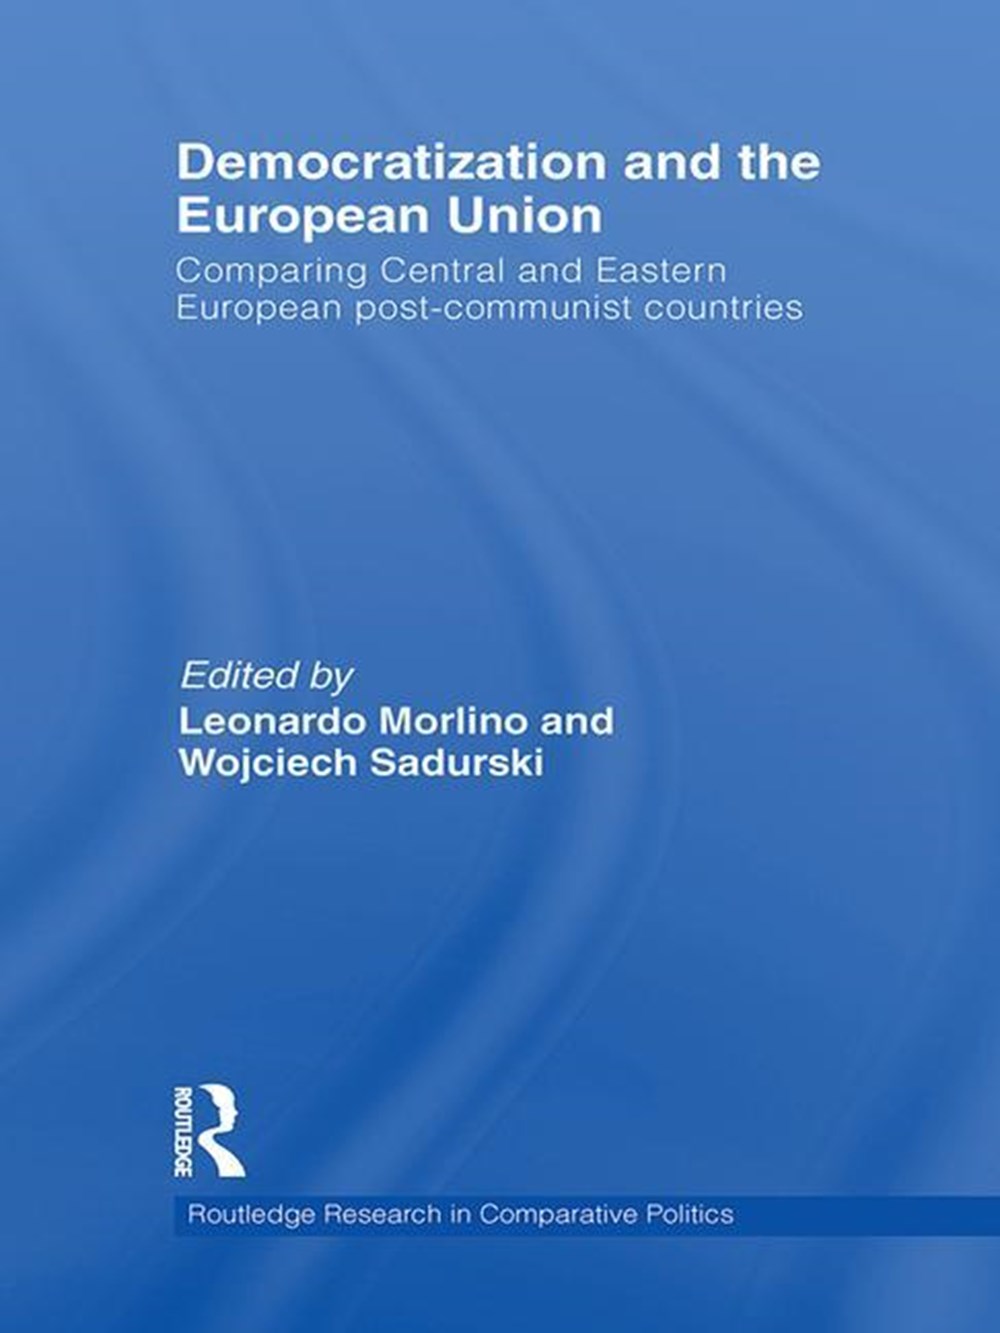 Democratization and the European Union: Comparing Central and Eastern European Post-Communist Countr